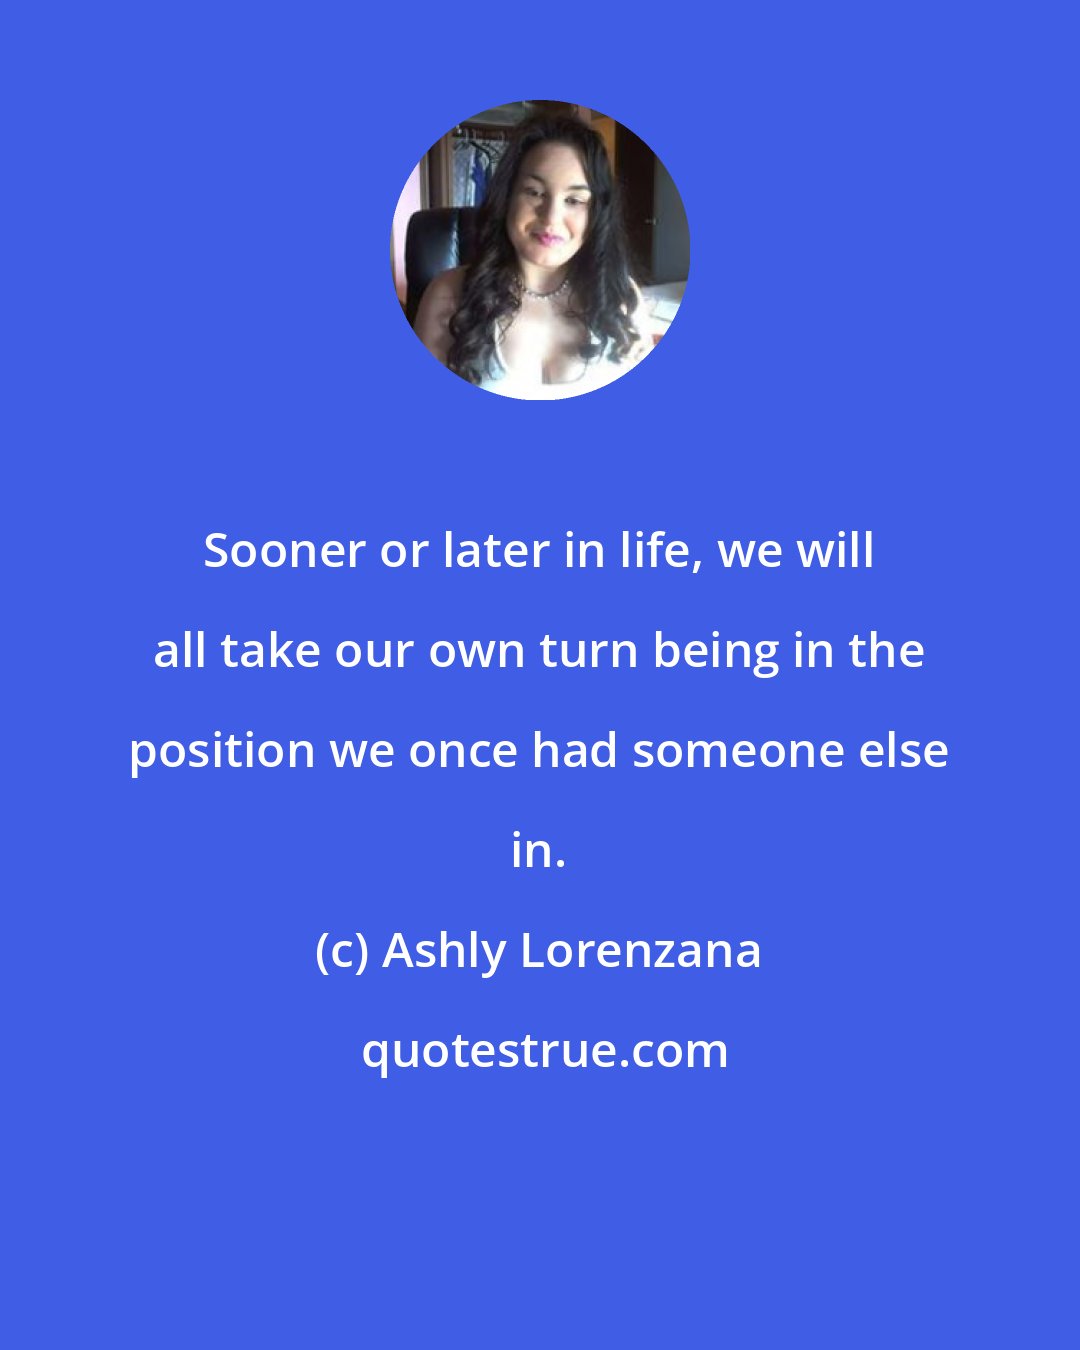 Ashly Lorenzana: Sooner or later in life, we will all take our own turn being in the position we once had someone else in.